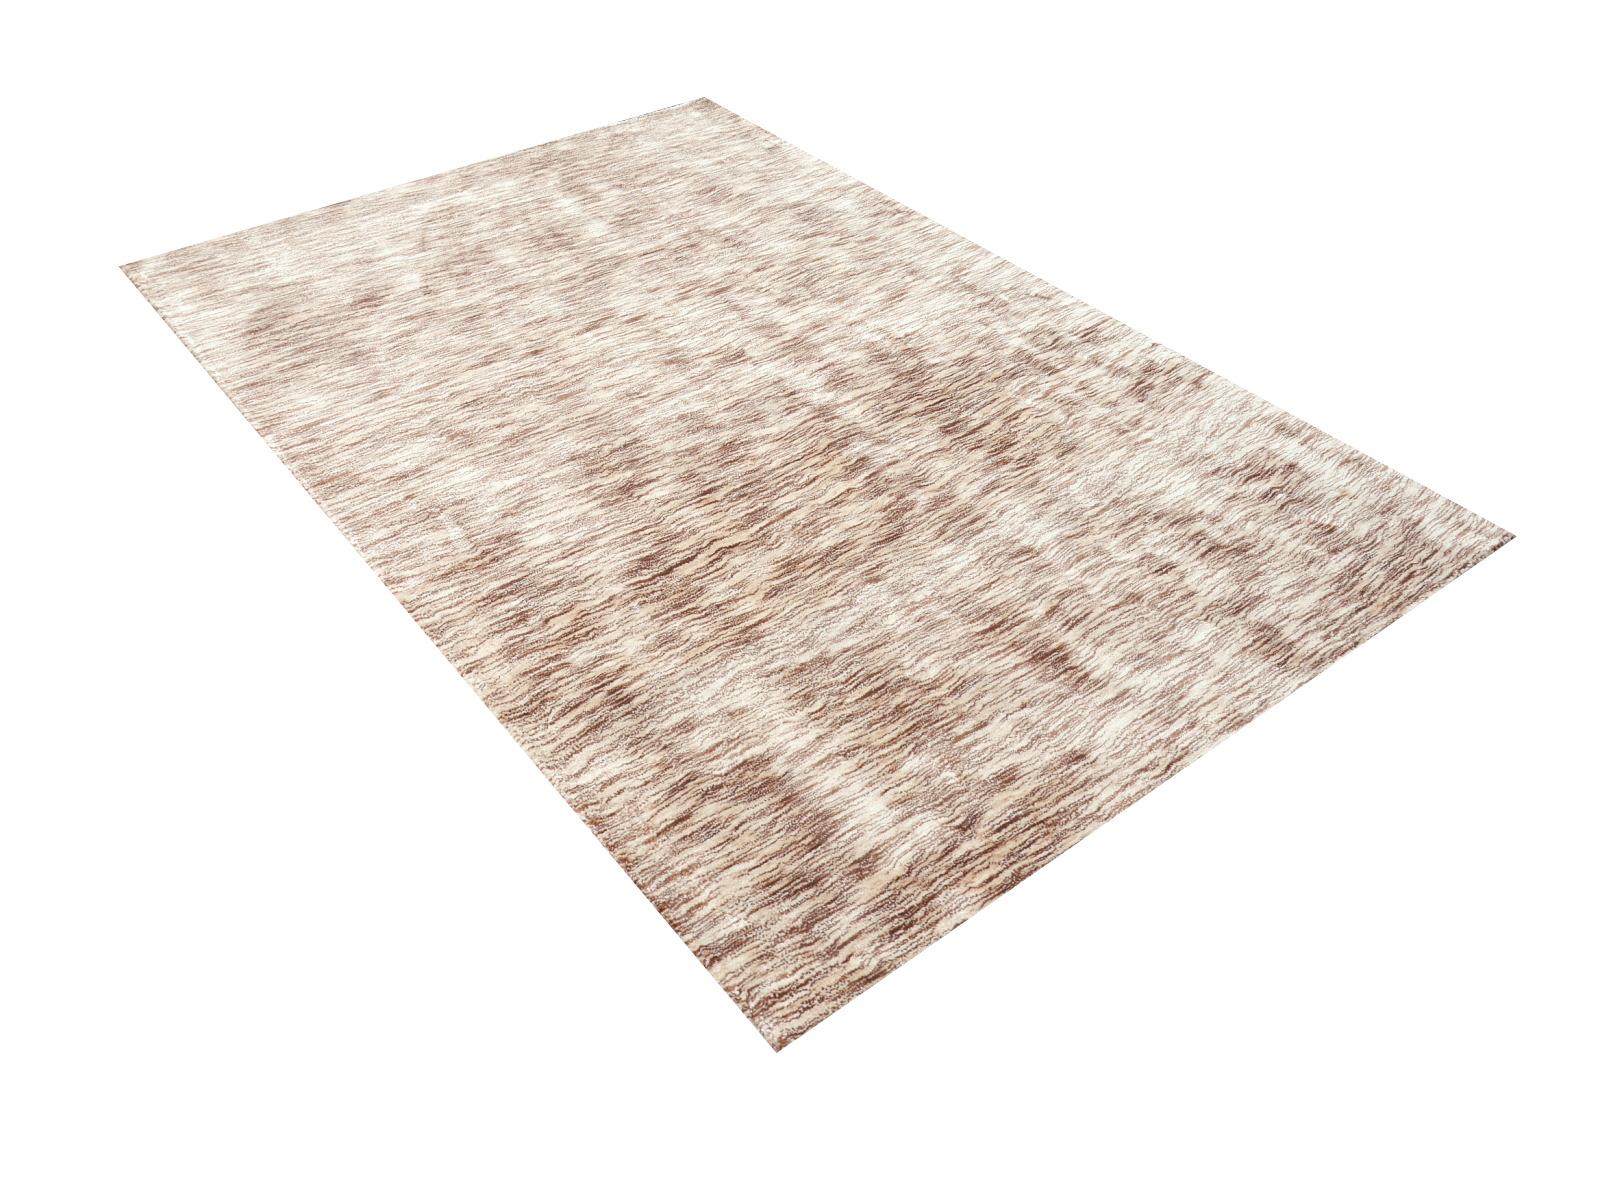 Hand-Crafted Hand Tufted Tiger Rug in Beige, Brown, Cinnamon 6 x 4 ft